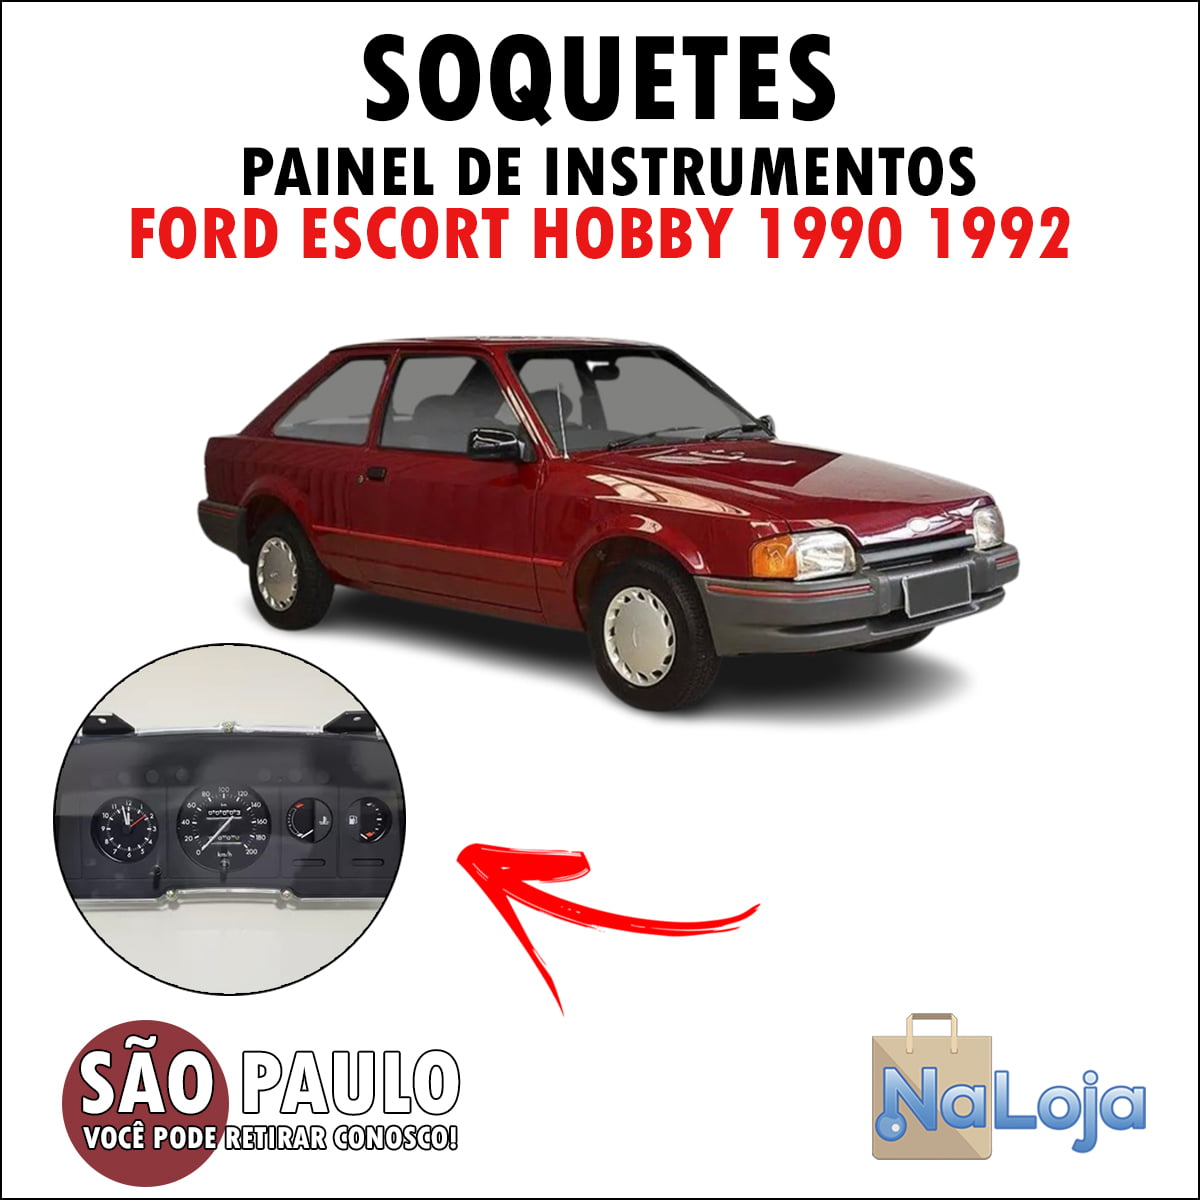 Soquetes Para Painel Instrumento Ford Escort Hobby 1990 1992